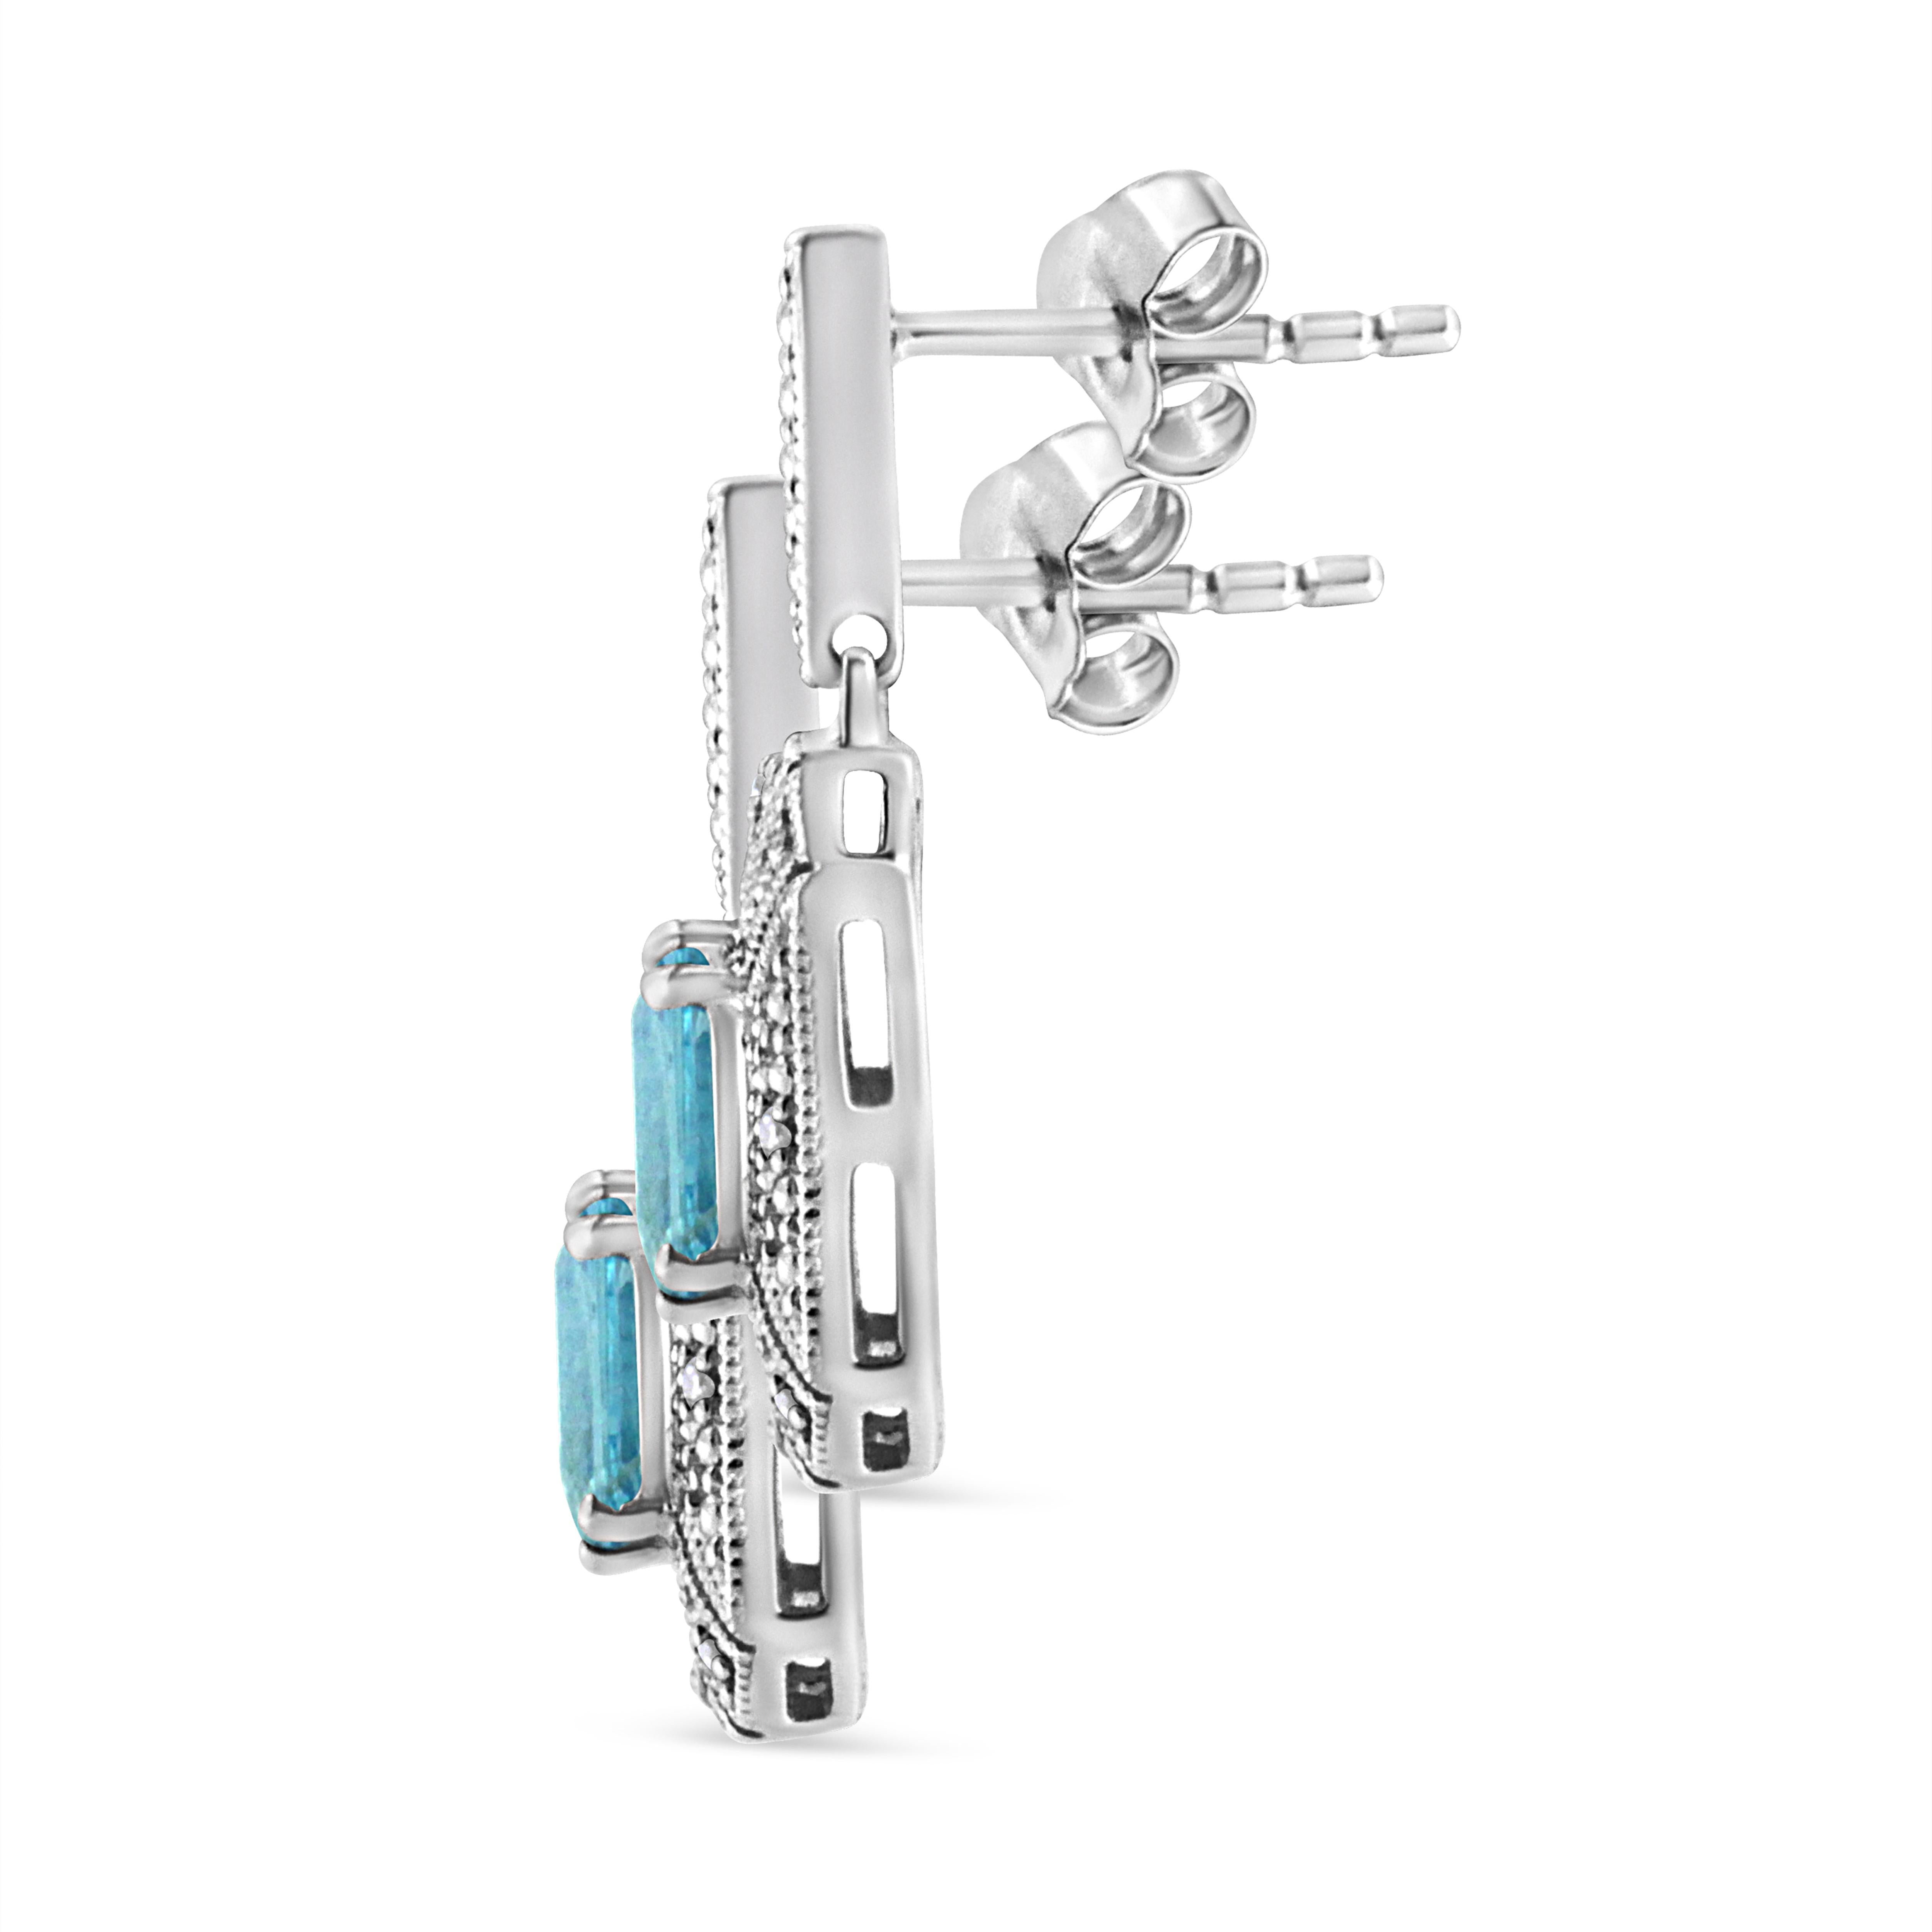 You won't regret adding these show stopper art deco drop and dangle .925 sterling silver earrings to your collection! An intricate design of silver beads surround a drop dead gorgeous 7x5MM emerald shape blue topaz at the center of each earring.